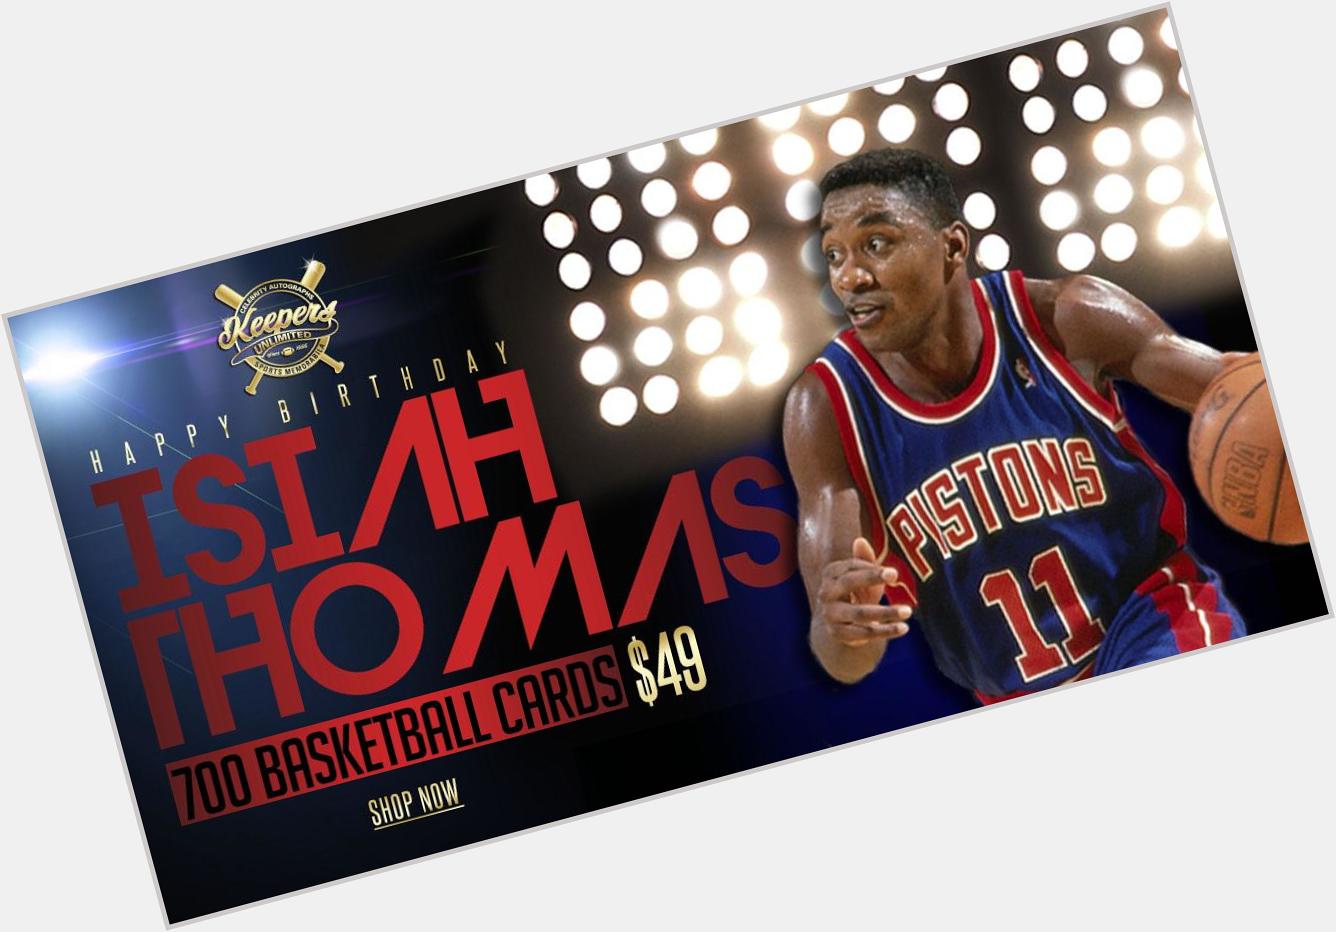 HAPPY BIRTHDAY TO ISIAH THOMAS! Get 700 Basketball Cards for $49. Two Days Only! 